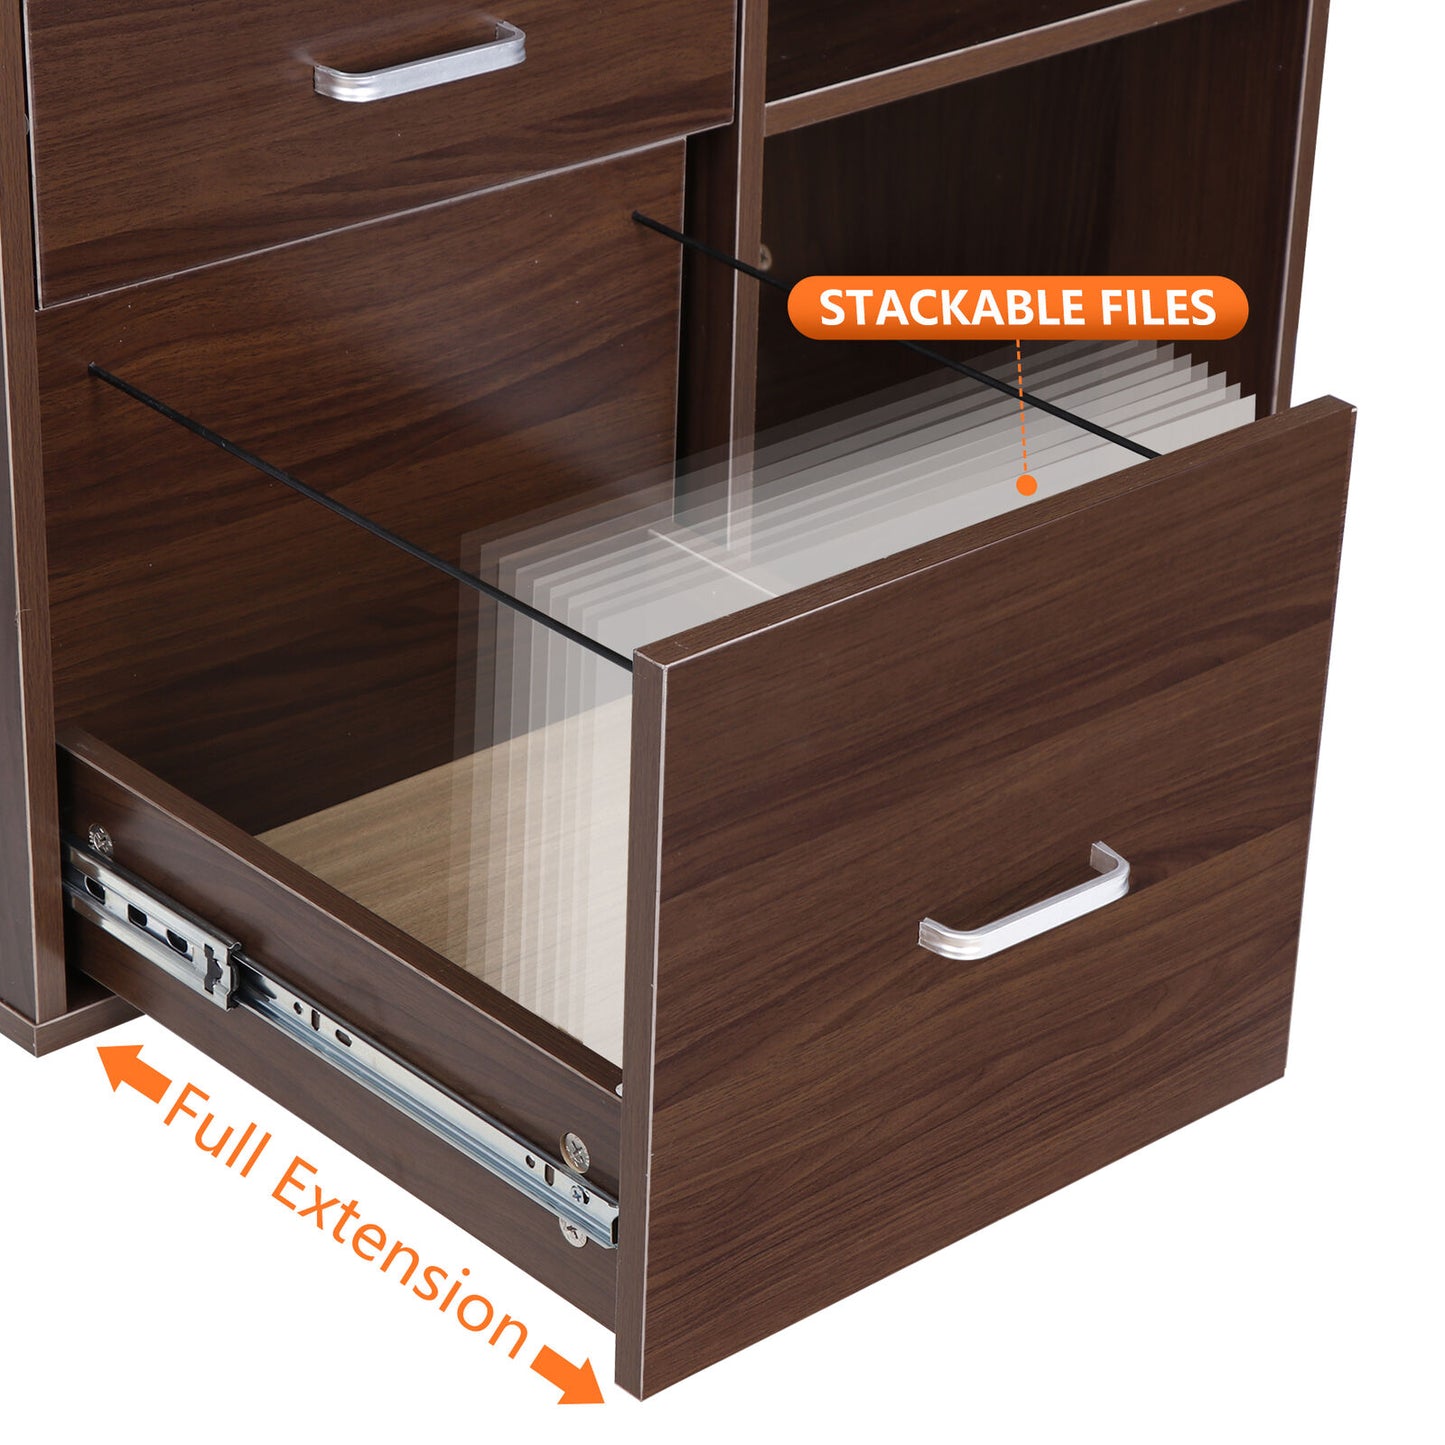 3-Drawer Wood File Cabinet Mobile Lateral Filing Cabinet for Home Office Brown